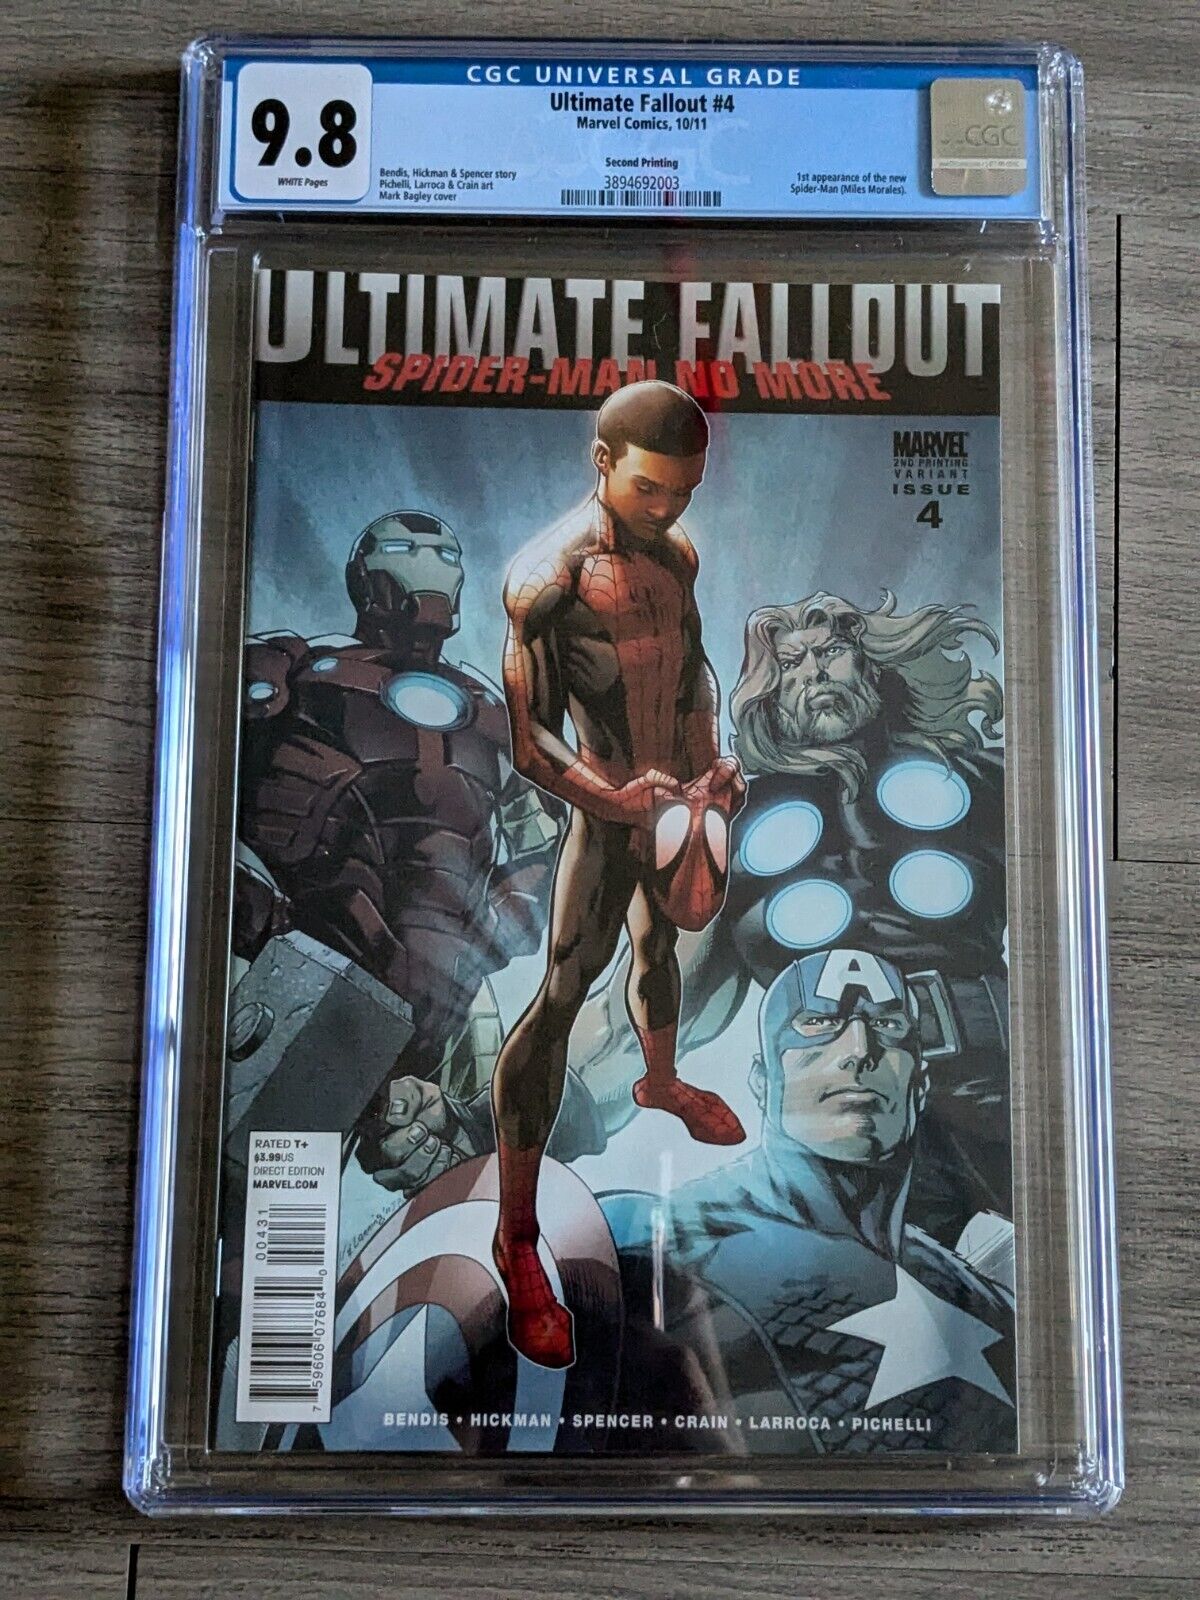 ULTIMATE FALLOUT #4 (2011) CGC 9.8 1st MILES MORALES SPIDER-MAN 2nd PRINT MARVEL